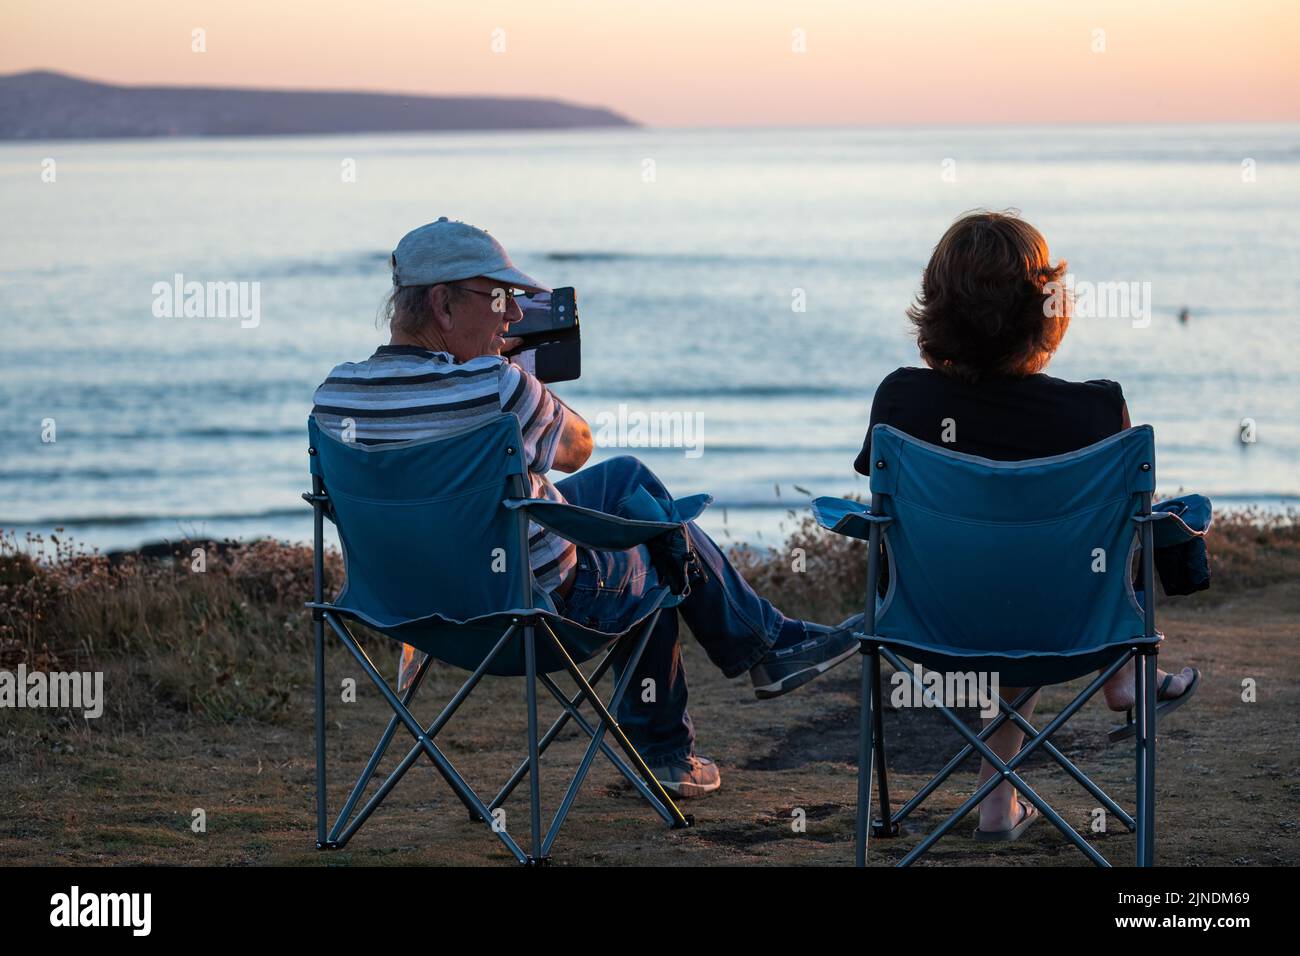 Two people sit in camping chairs to watch and photograph the Sunset in Godrevy, Cornwall,UK Stock Photo